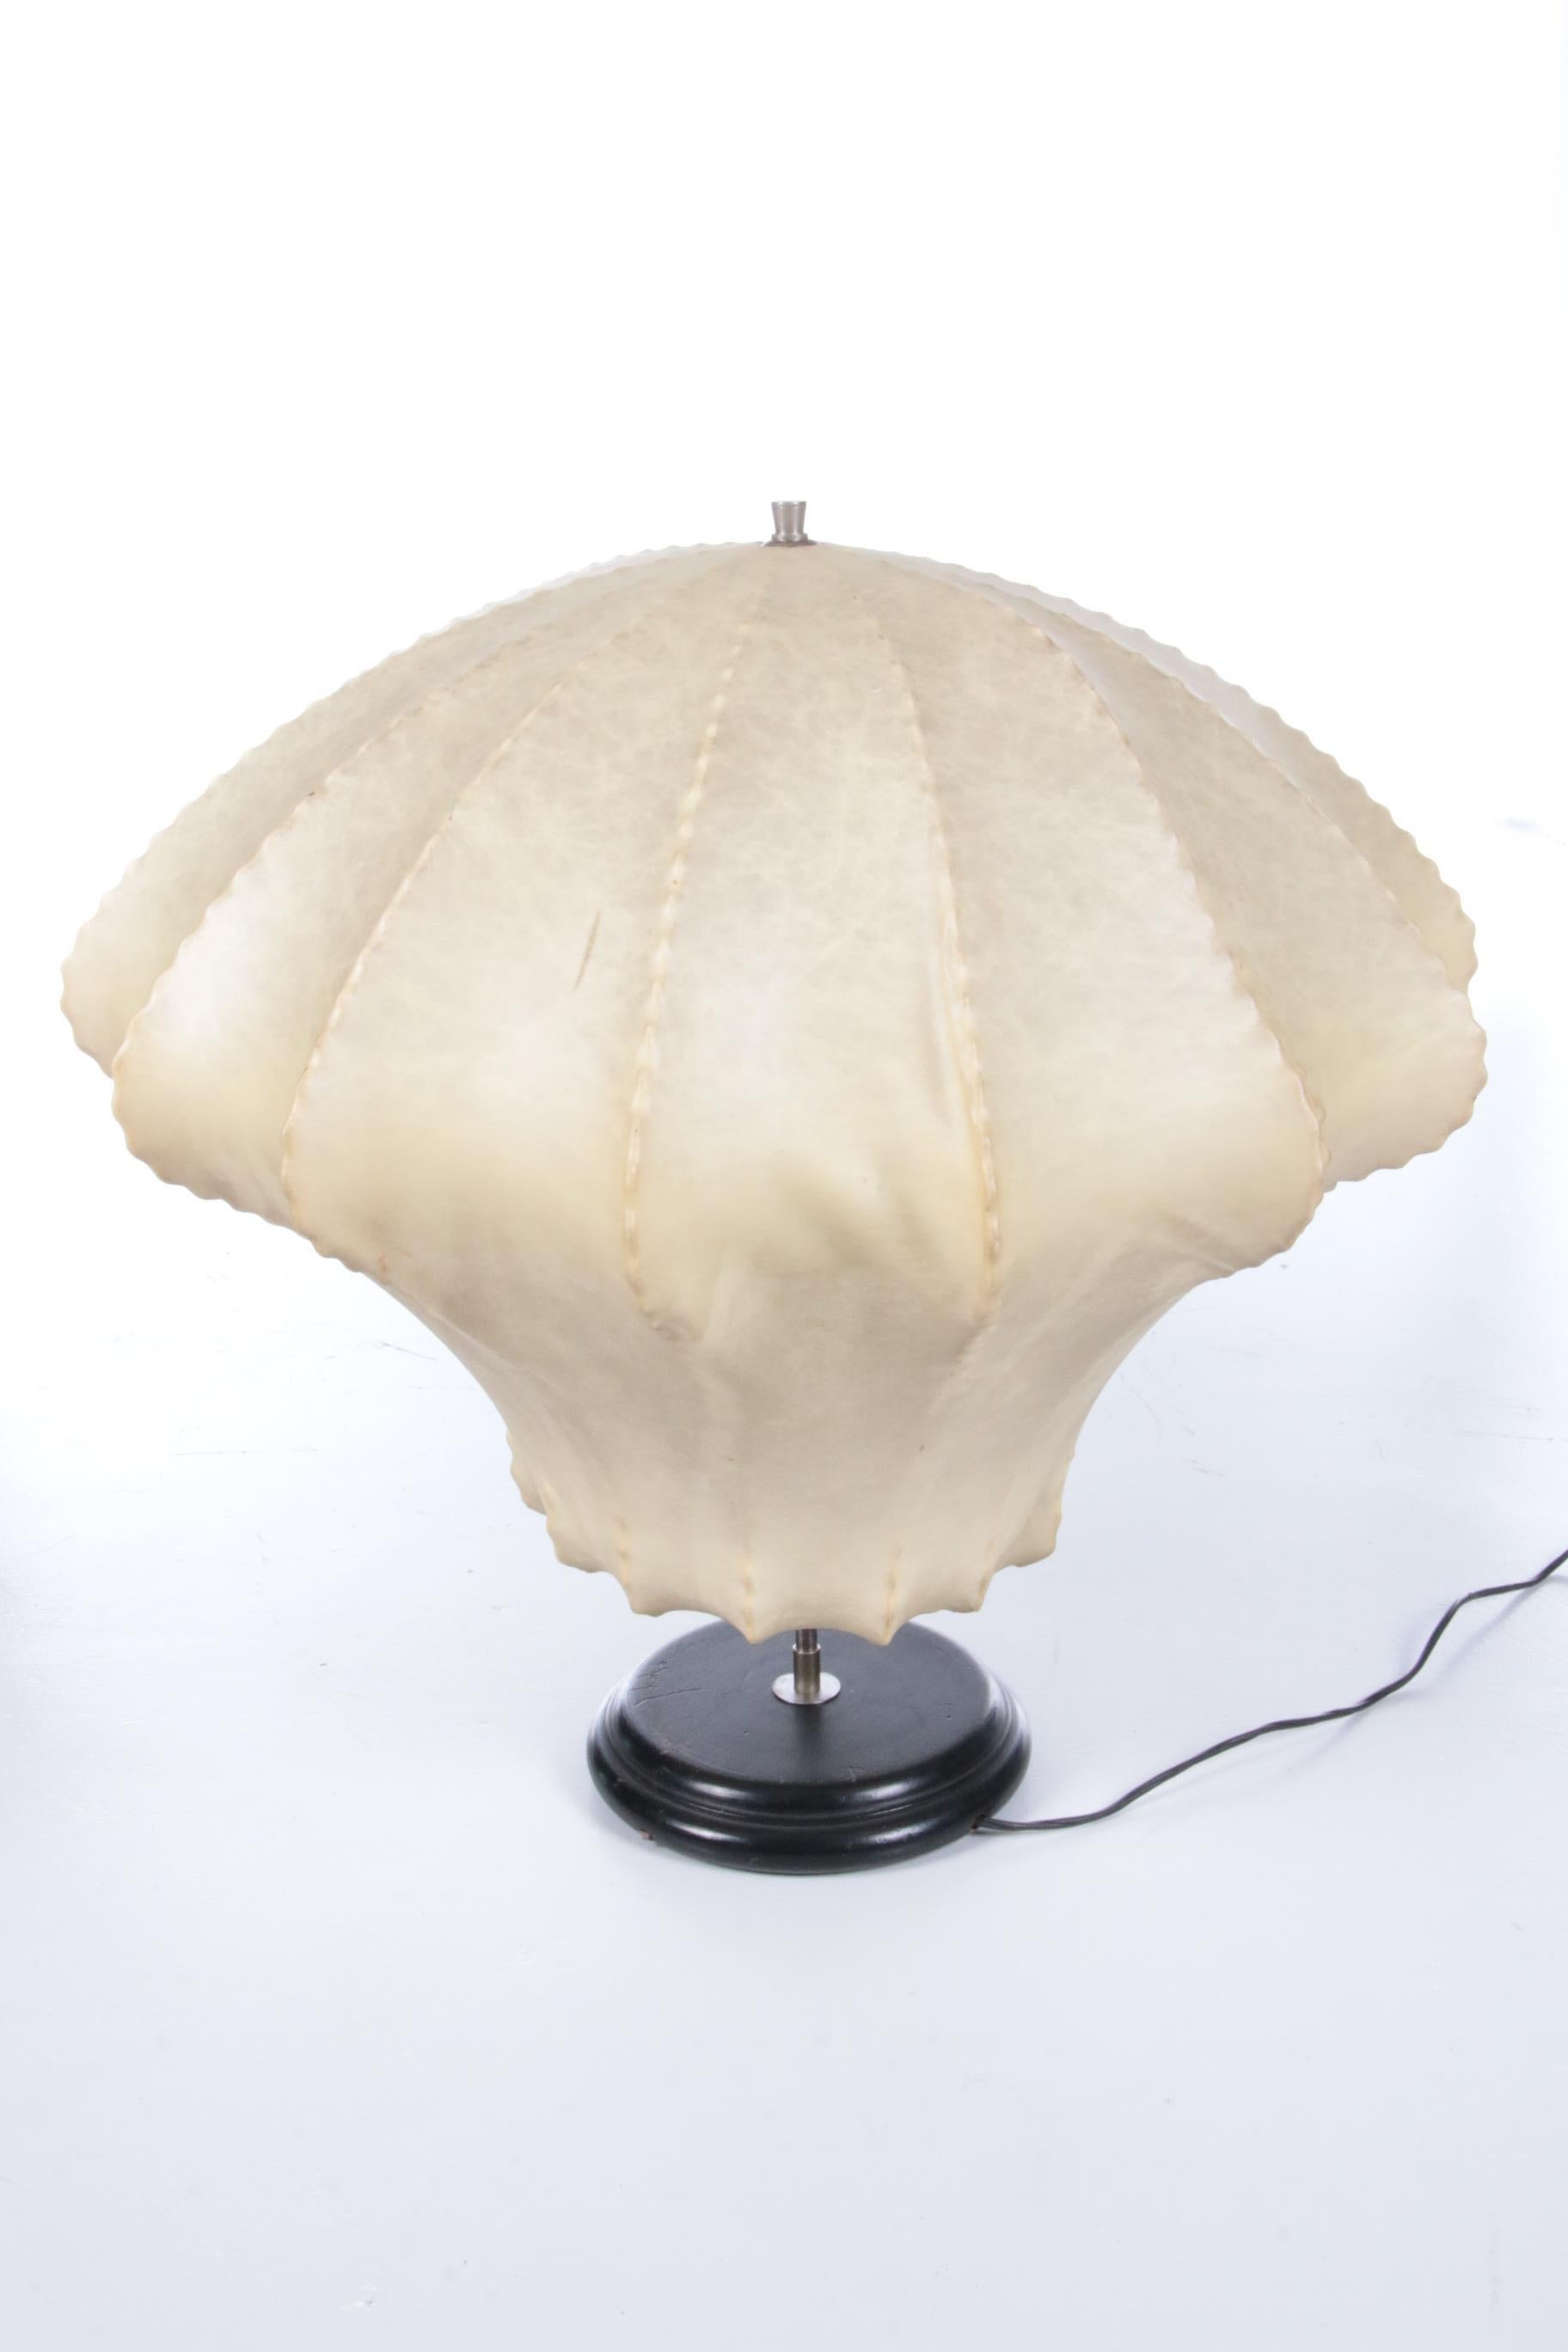 Mid-Century Modern Cocoon Table Lamp by Castiglioni for Flos 1960 Italy